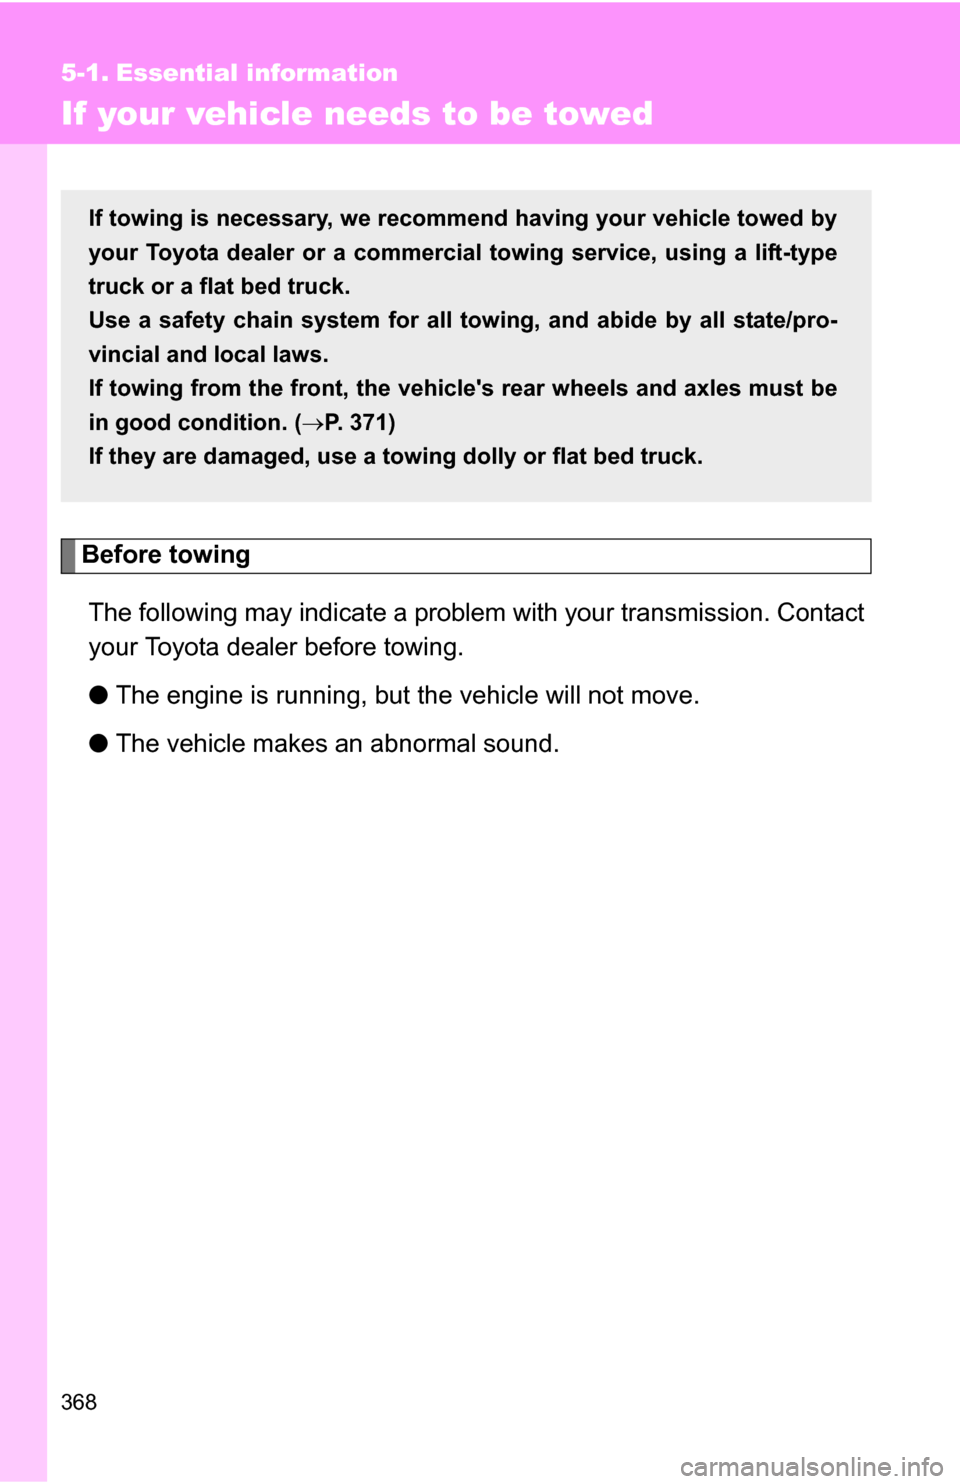 TOYOTA COROLLA 2009 10.G User Guide 368
5-1. Essential information
If your vehicle needs to be towed
Before towingThe following may indicate a problem with your transmission. Contact
your Toyota dealer before towing.
● The engine is r